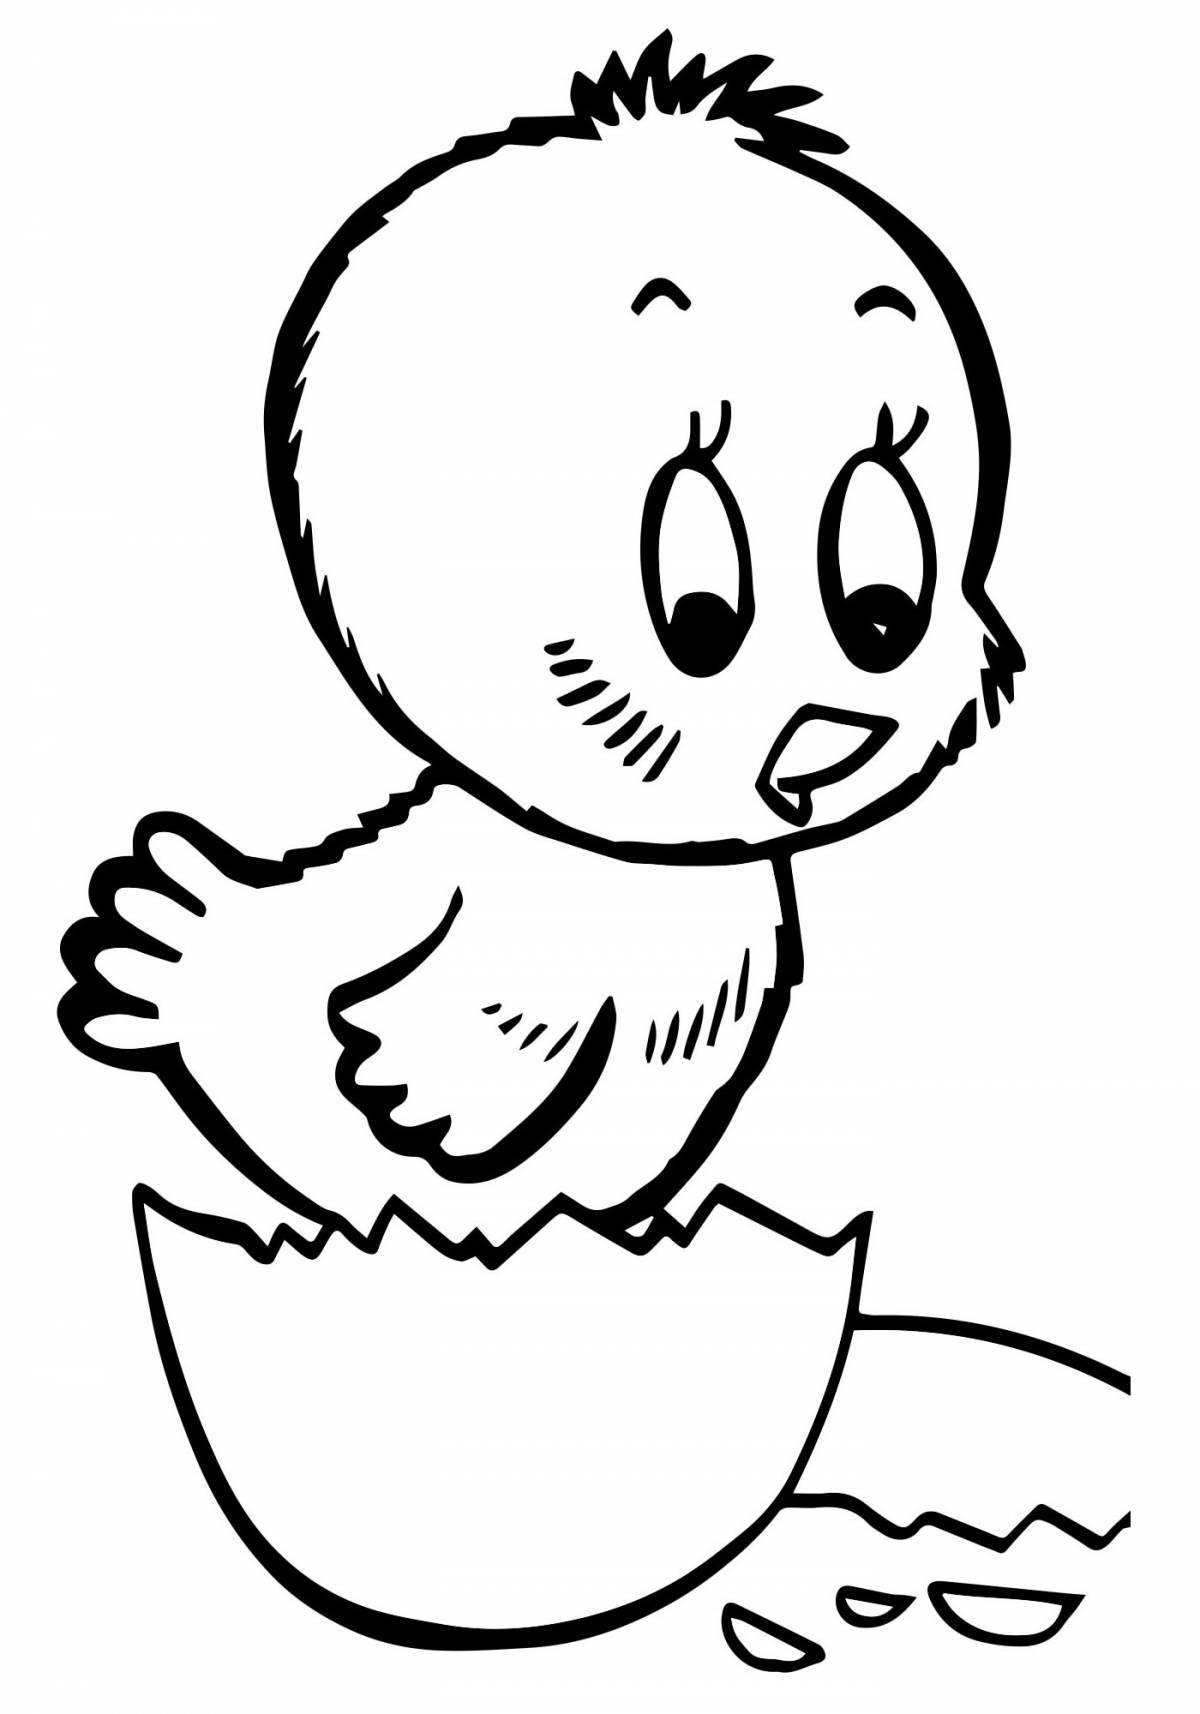 Coloring page happy chick in egg